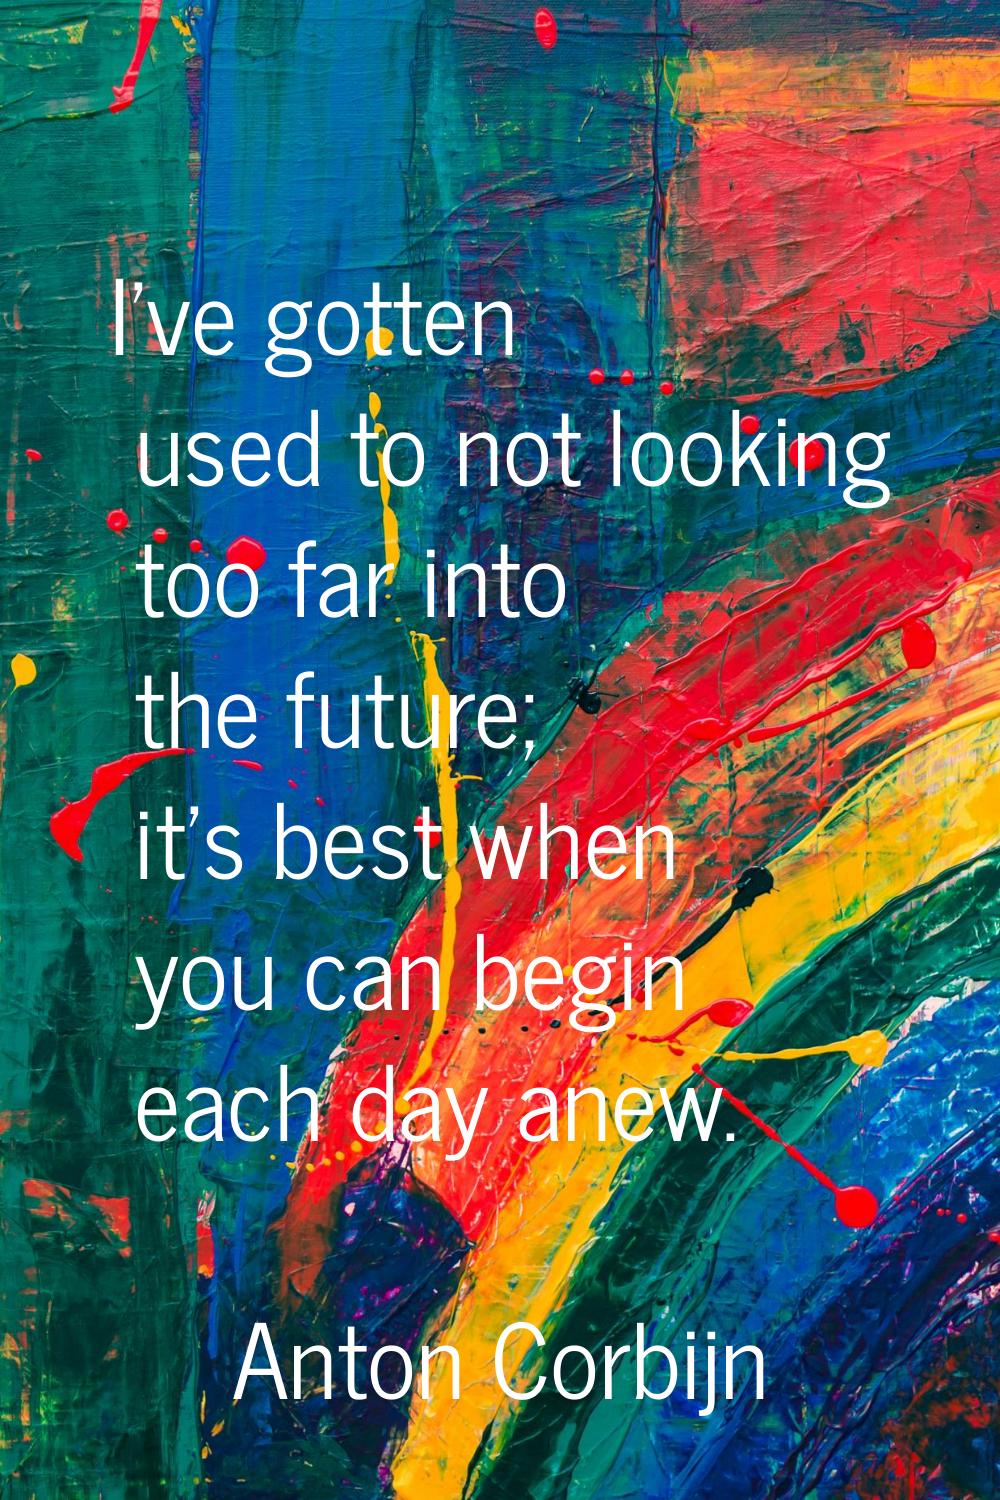 I've gotten used to not looking too far into the future; it's best when you can begin each day anew